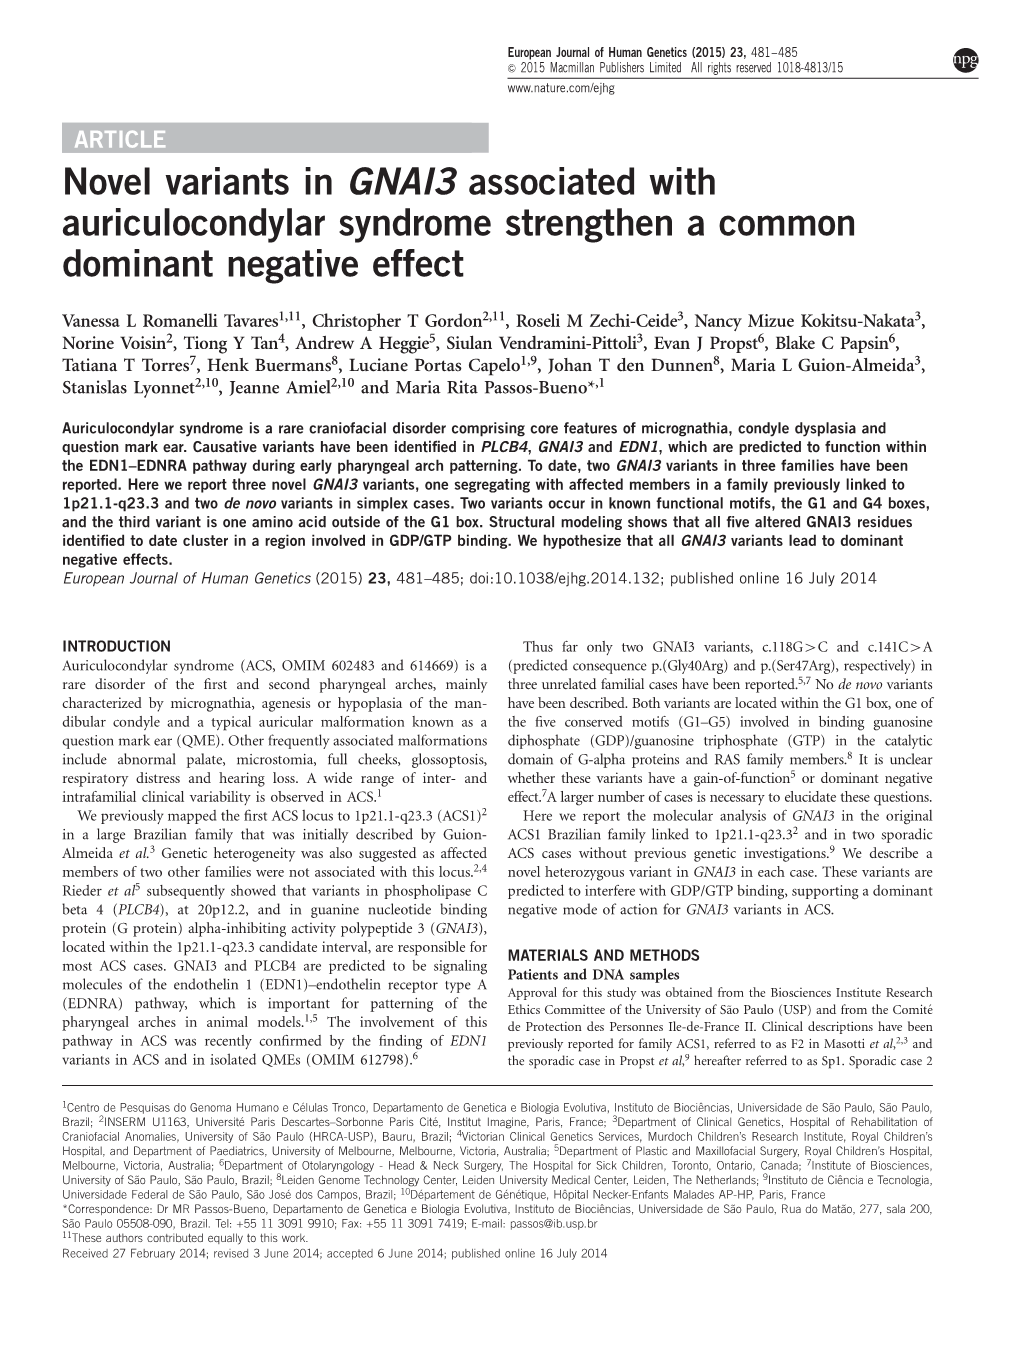 Novel Variants in GNAI3 Associated with Auriculocondylar Syndrome Strengthen a Common Dominant Negative Effect